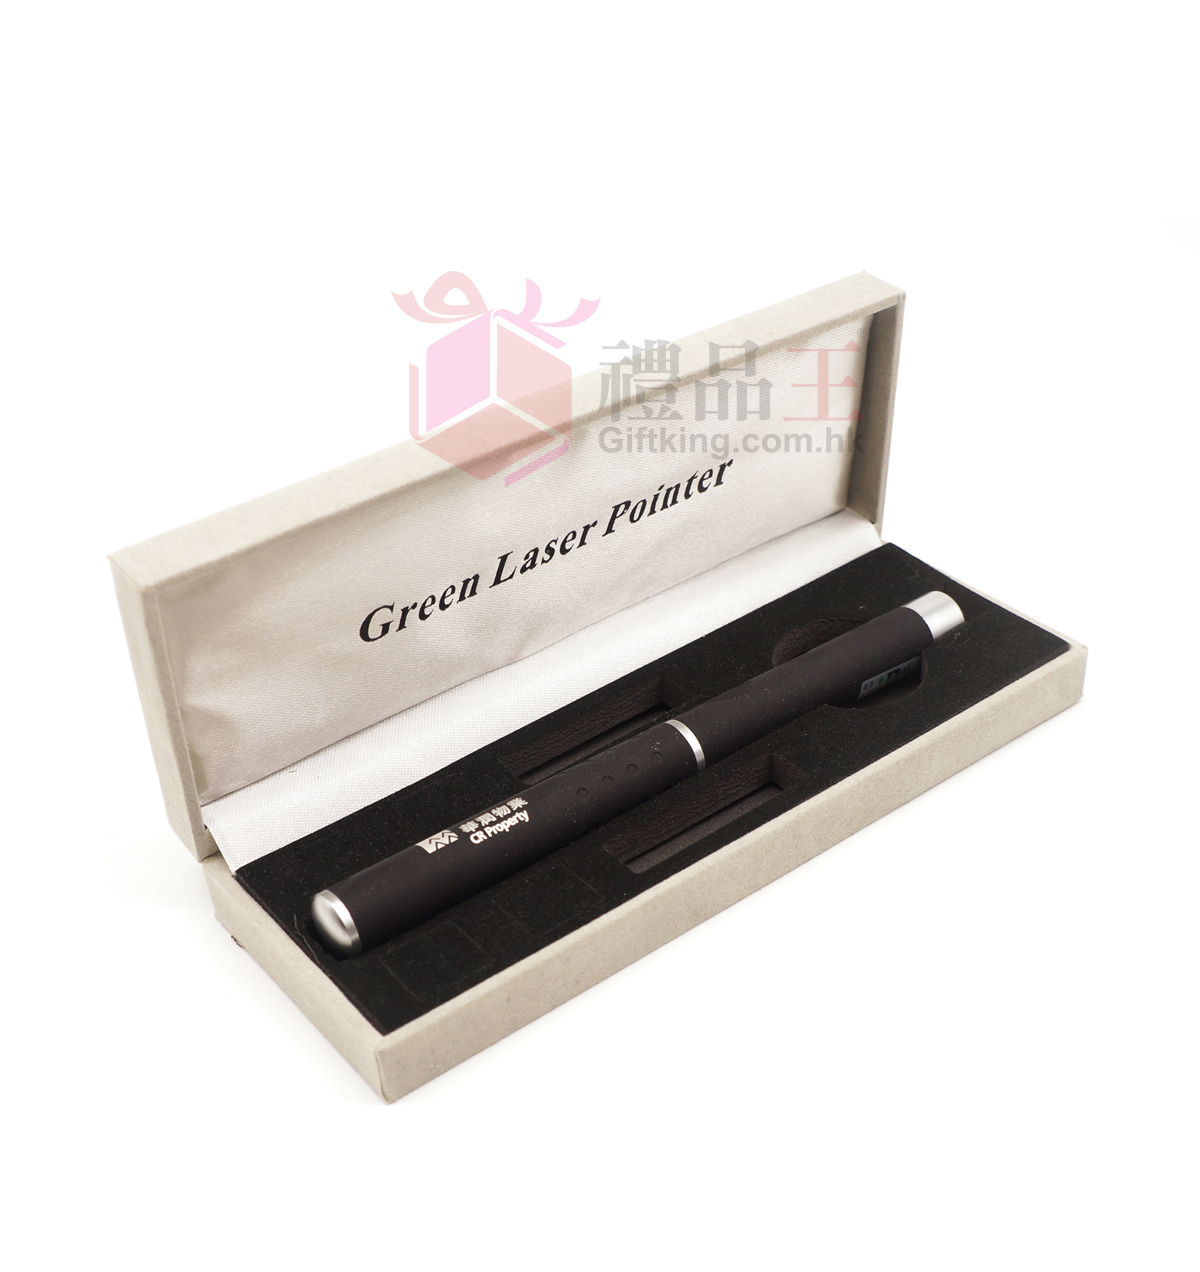 China Resources Property teaching laser pen (Stationery Gift)